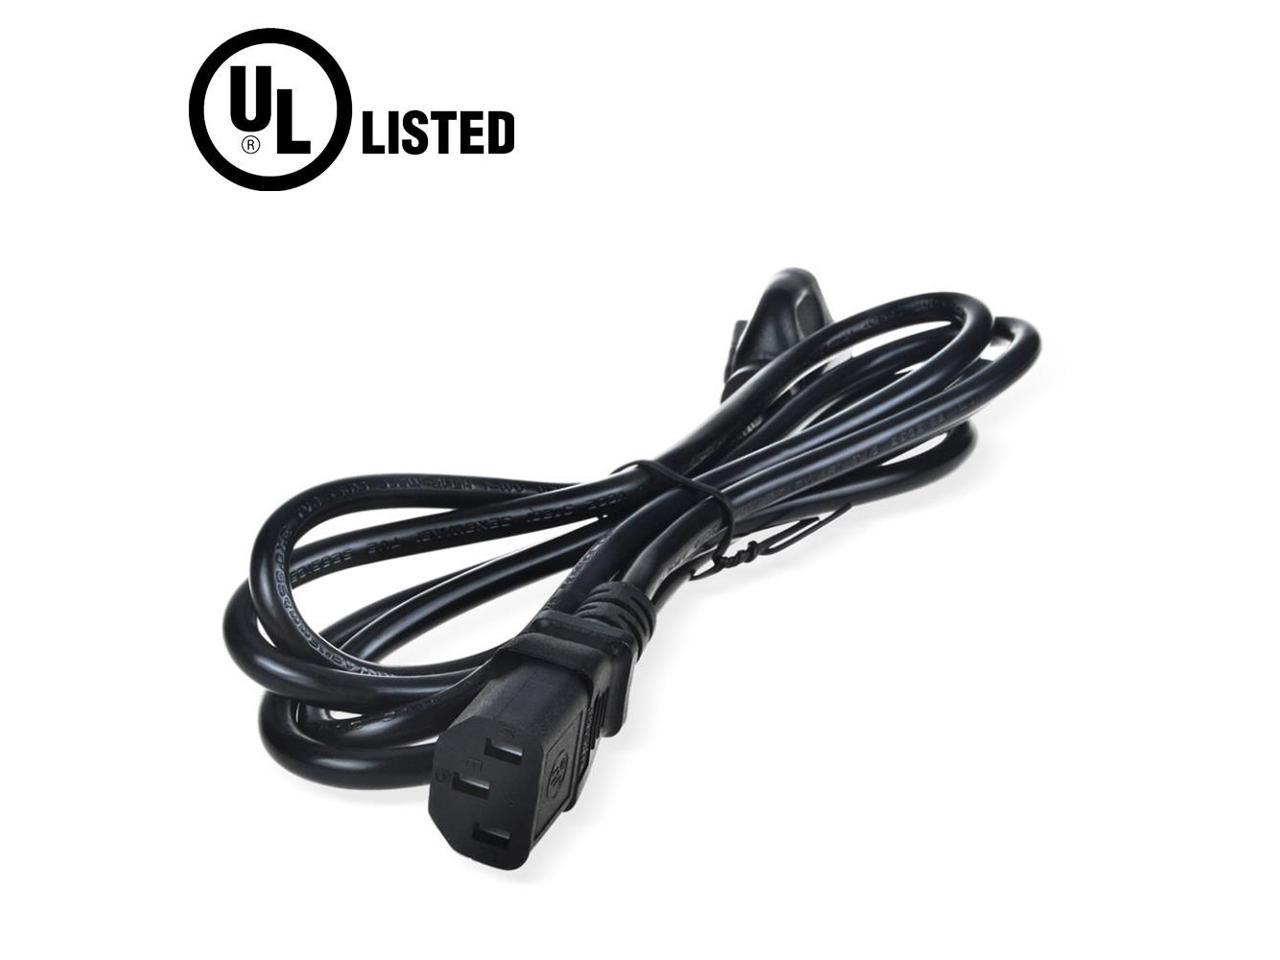 BRST AC Power Cord for Precor EFX 5.23 EFX 5.33 EFX 5.17 EFX5.23-AEXJ EFX5.23-SK EFX5.33-ST EFX5.33-ADFJ Note: This Item is ONLY an AC Power Cord Cable. NOT Power Supply Whole Set. 